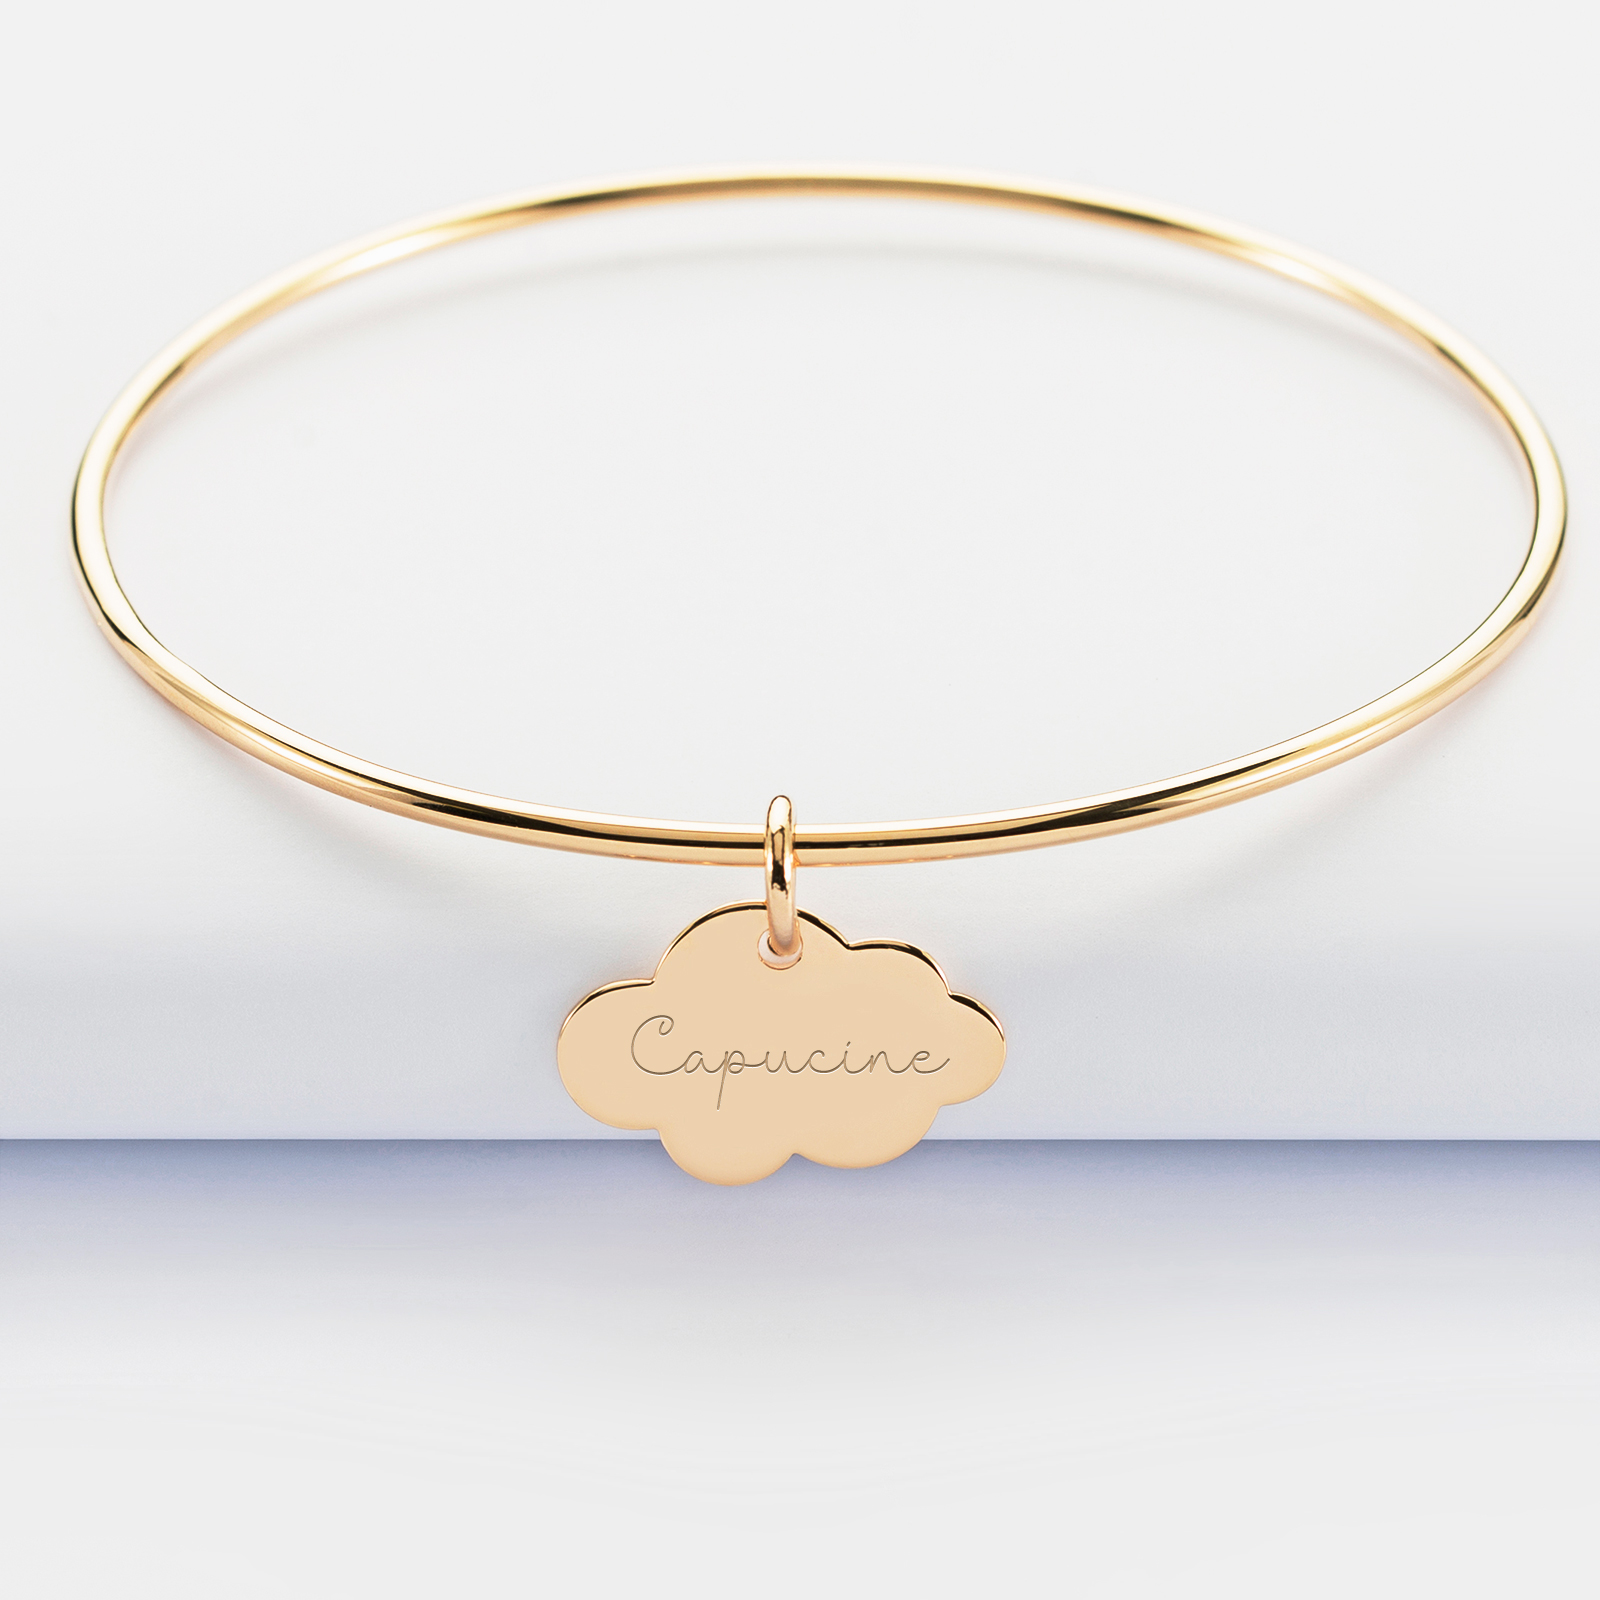 Personalised gold-plated bangle and engraved cloud medallion 20x14 mm - name